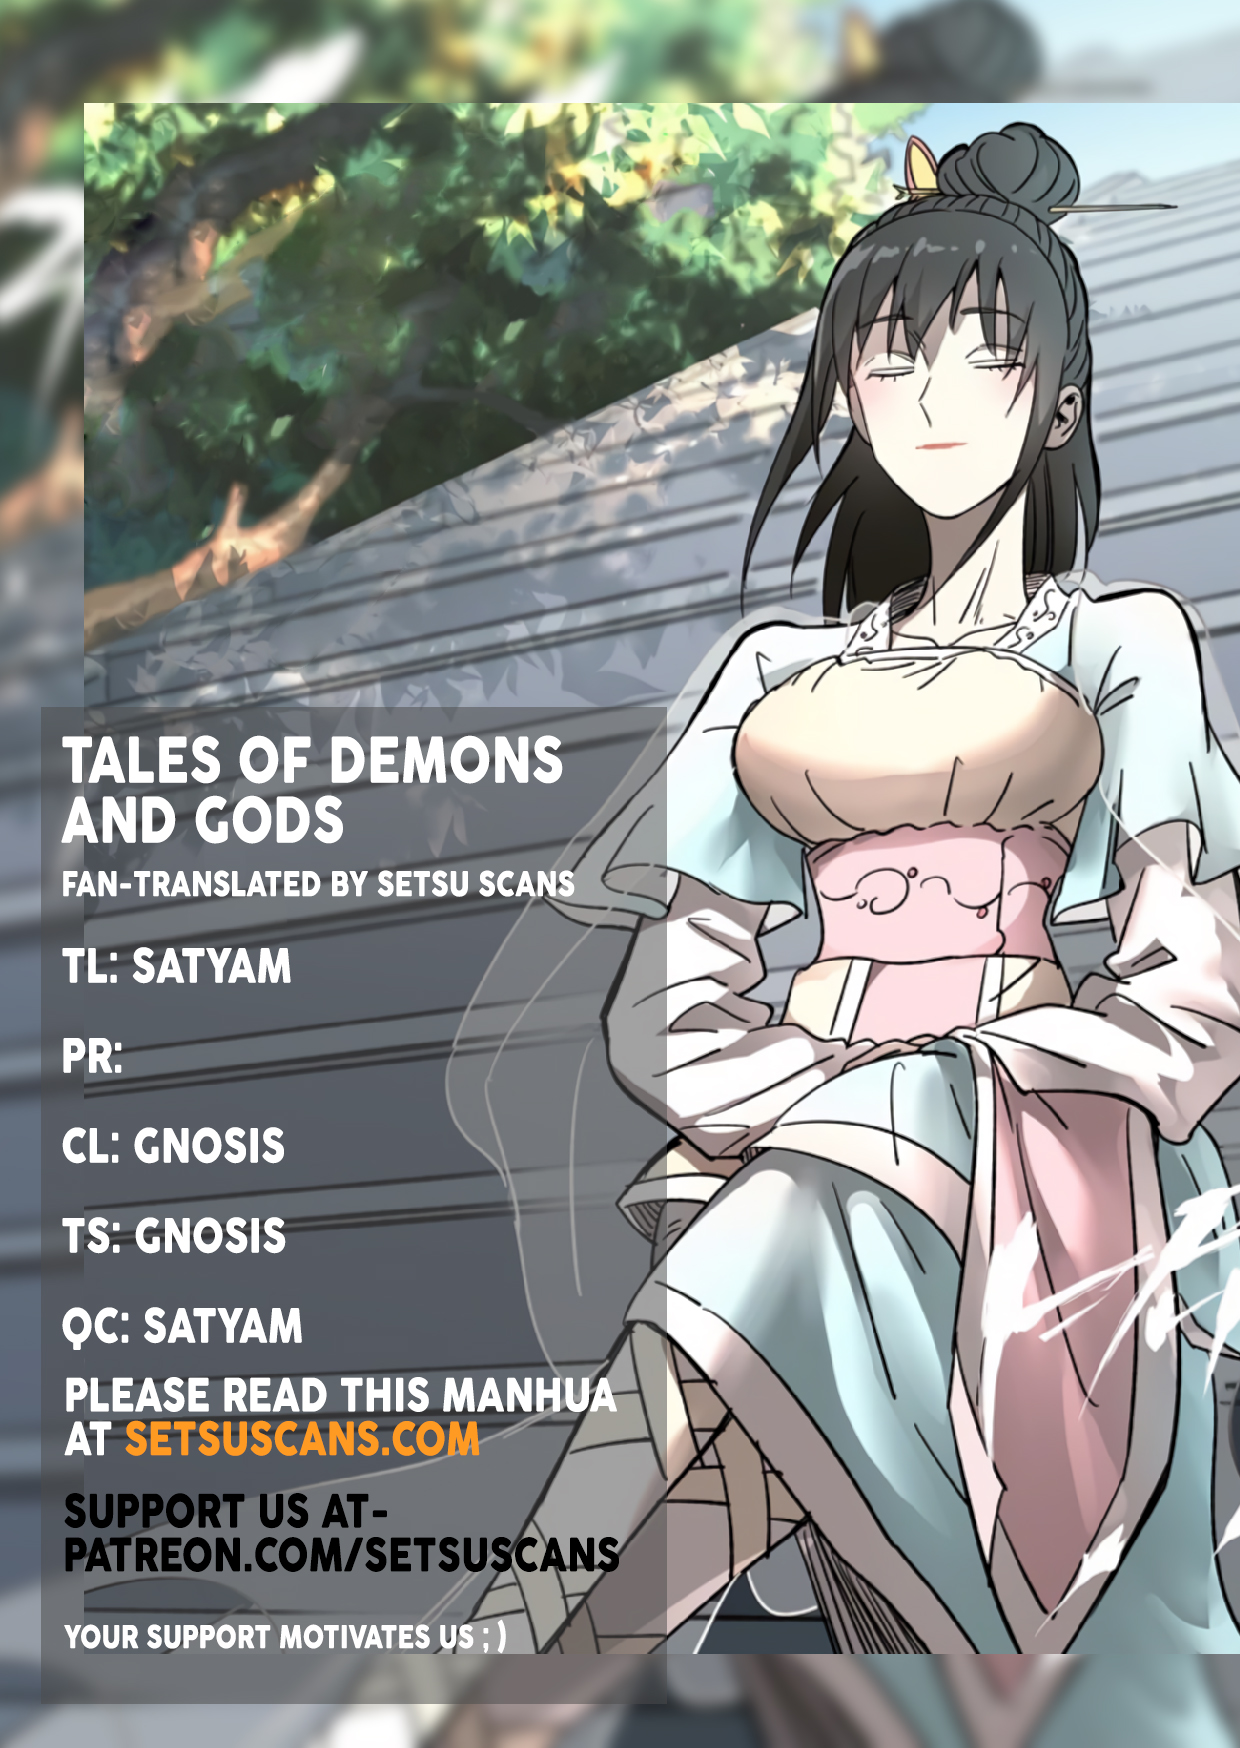 Tales of Demons and Gods - Chapter 24432 - Contest (1) - Image 1